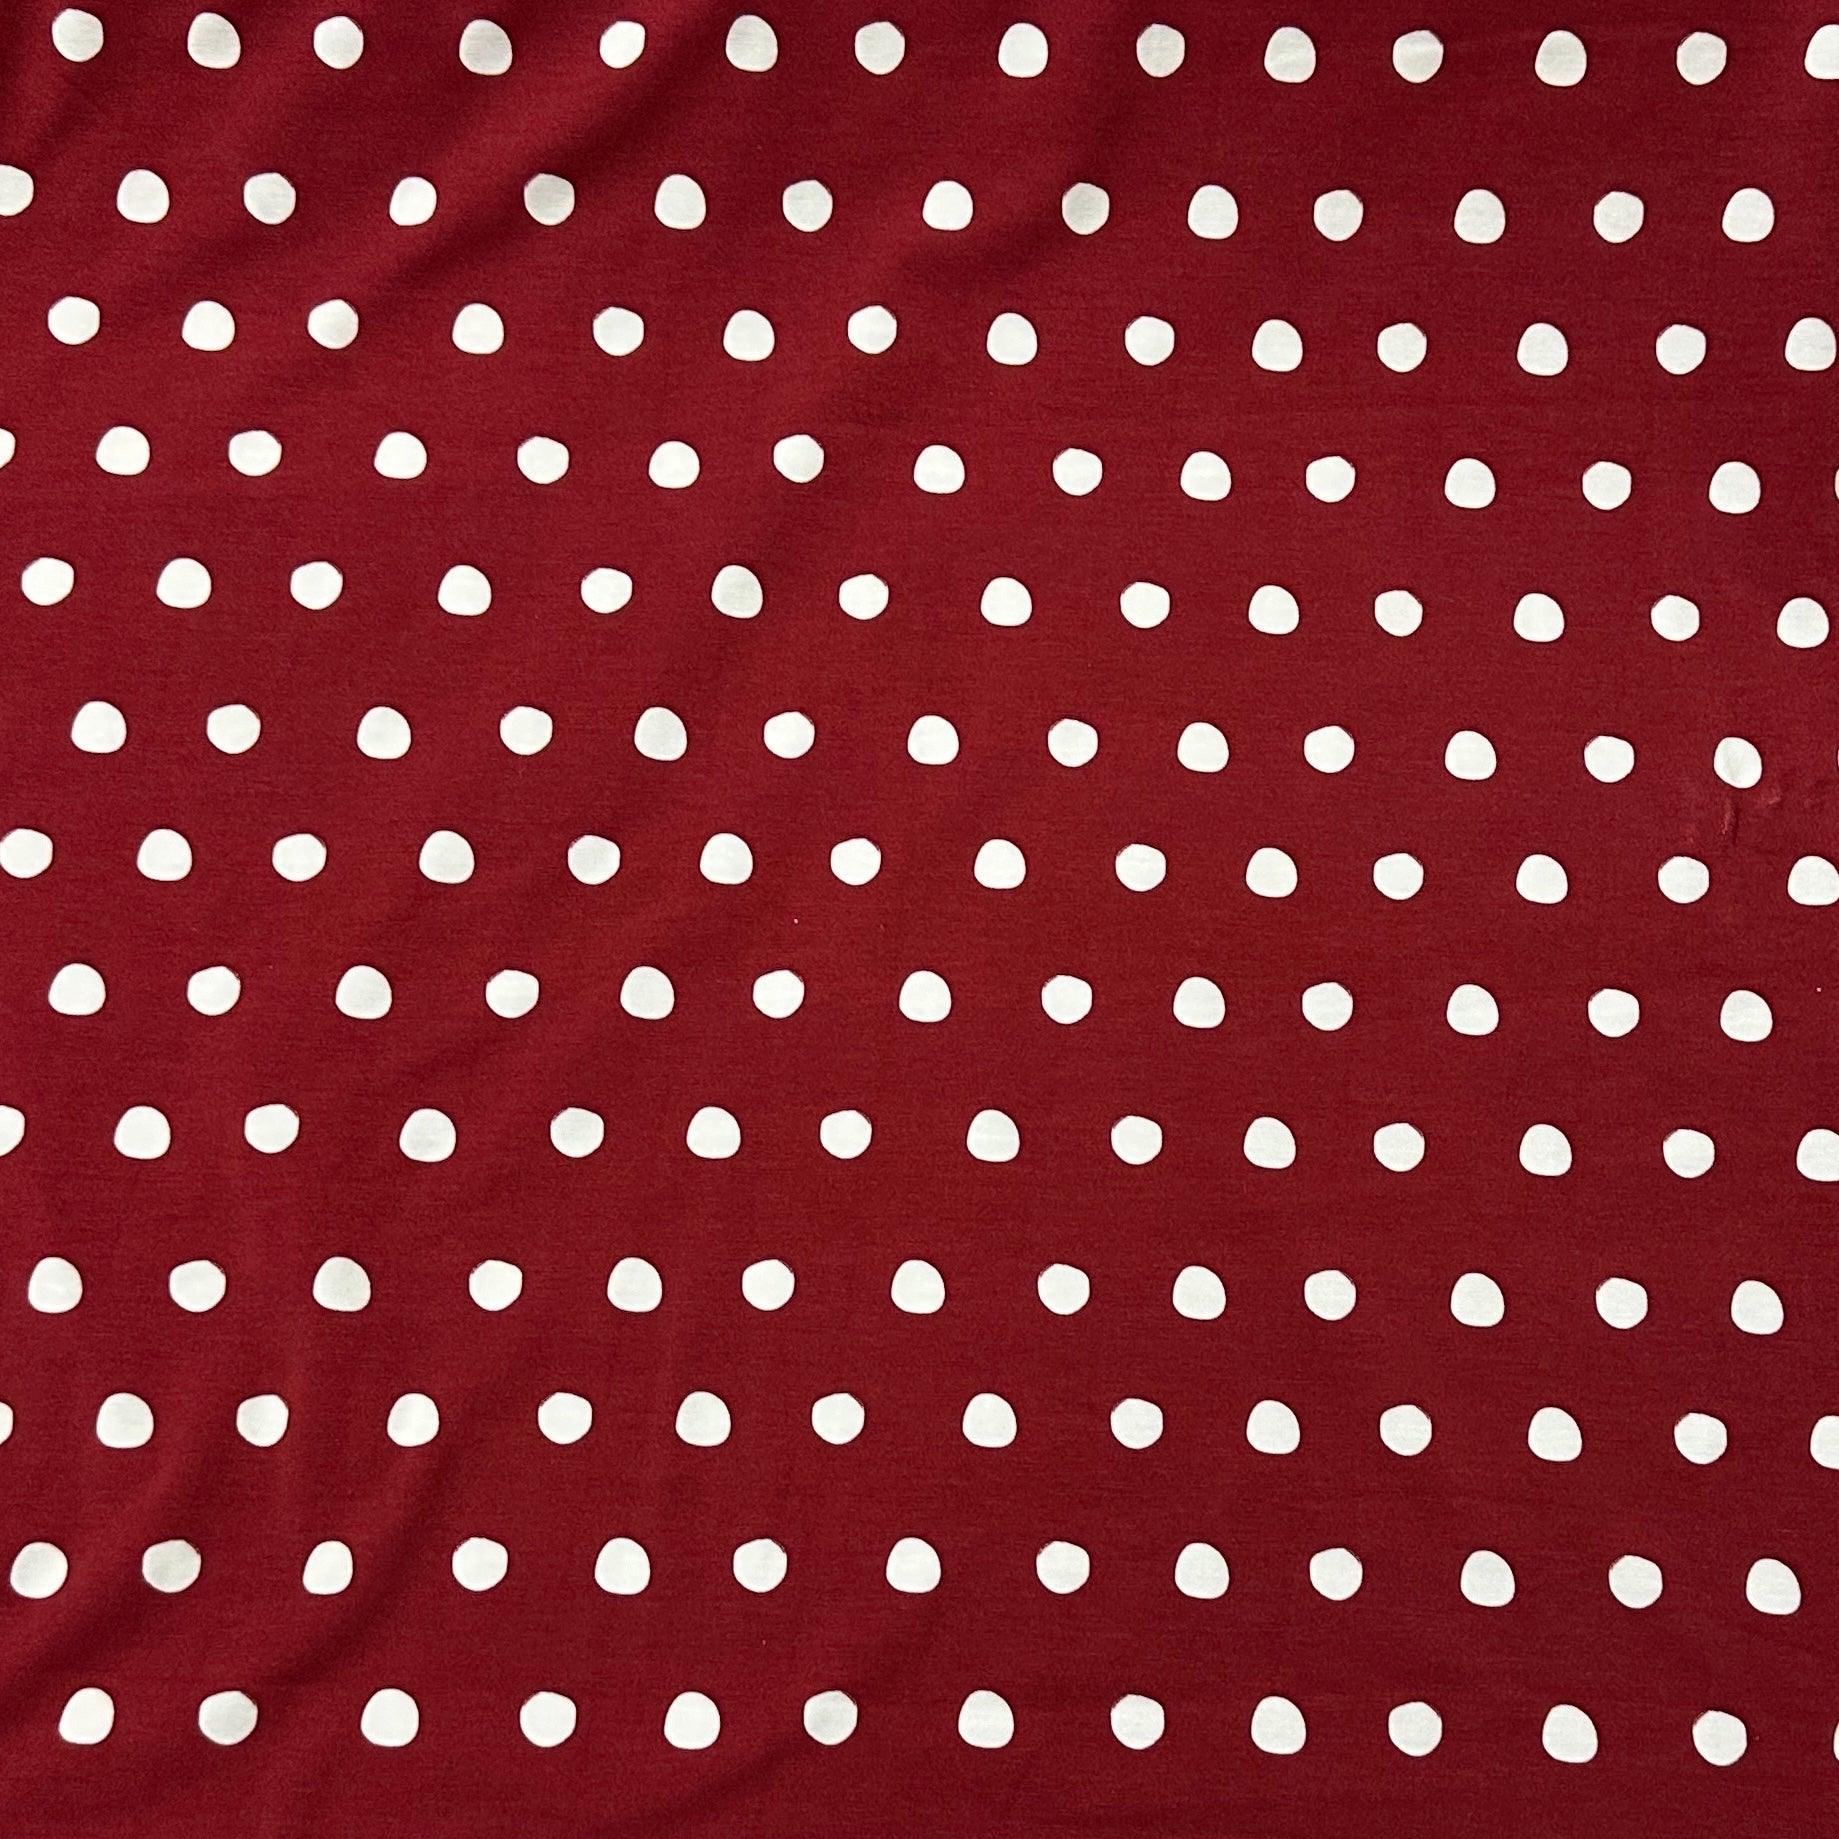 White Polka Dots on Red Bamboo/Spandex Jersey Fabric - Nature's Fabrics